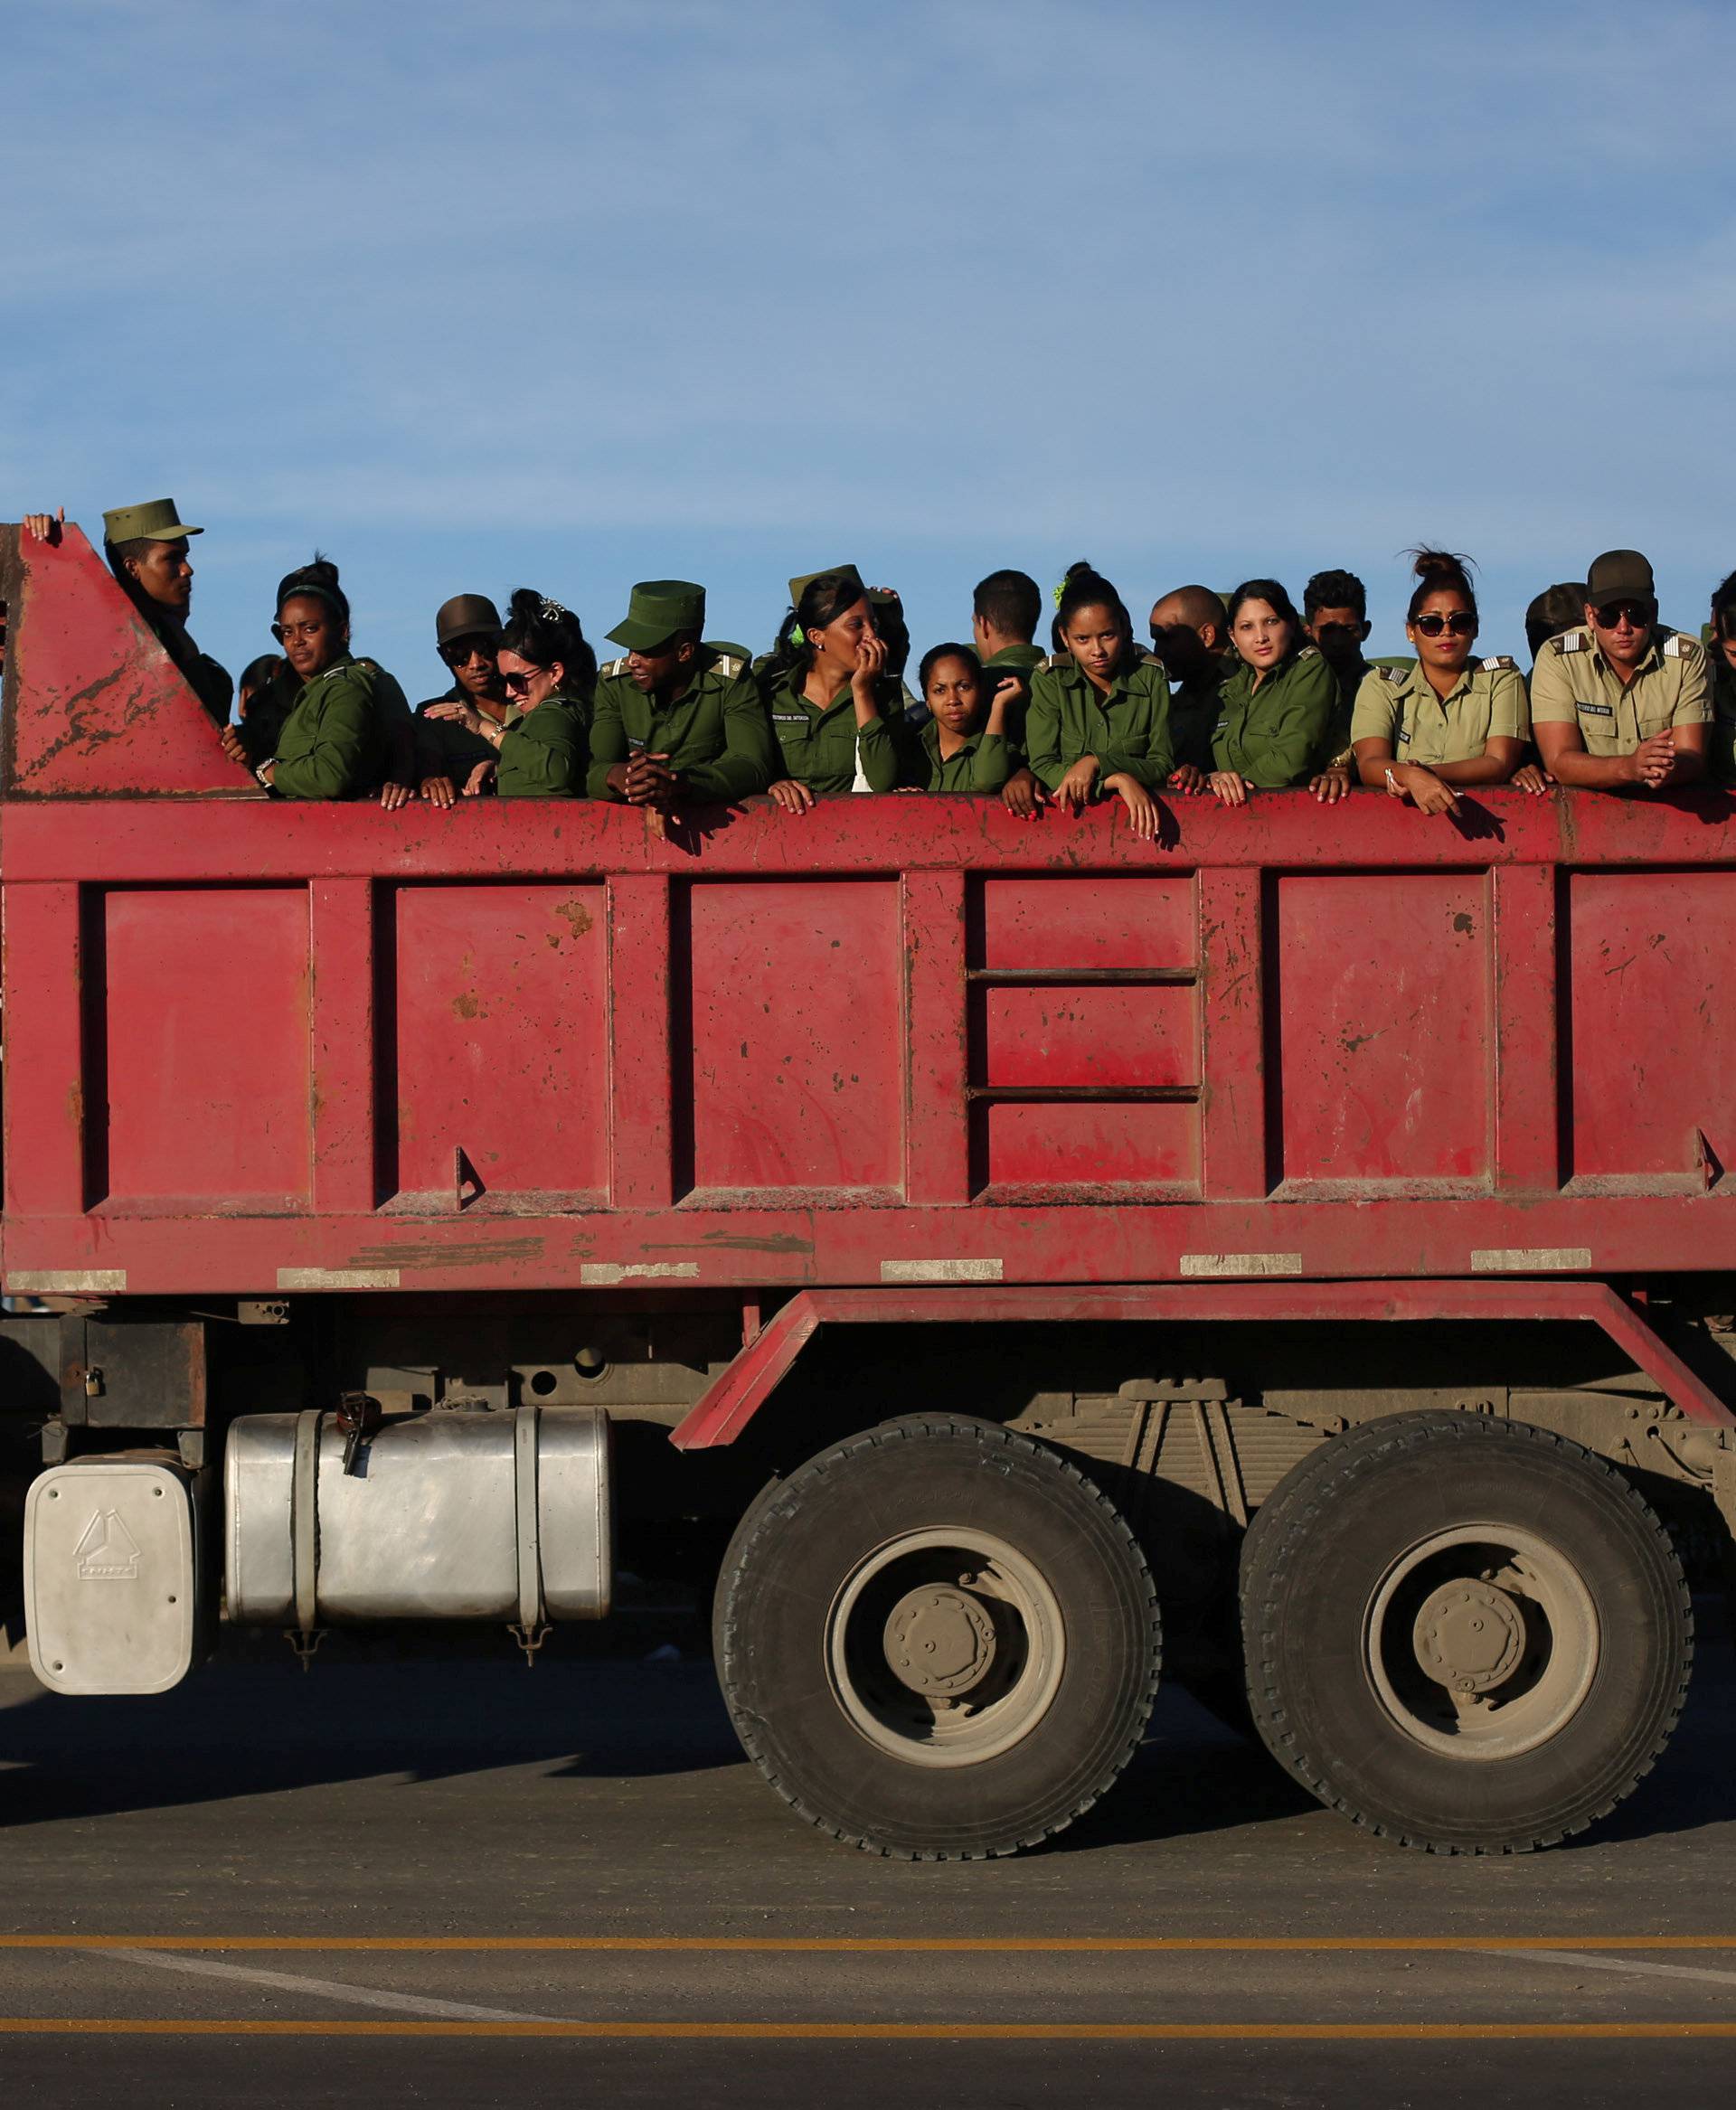 Soldiers are seen after looking at the caravan carrying the ashes of Cuba's late President Fidel Castro toward the Santa Ifigenia cemetery in Santiago de Cuba